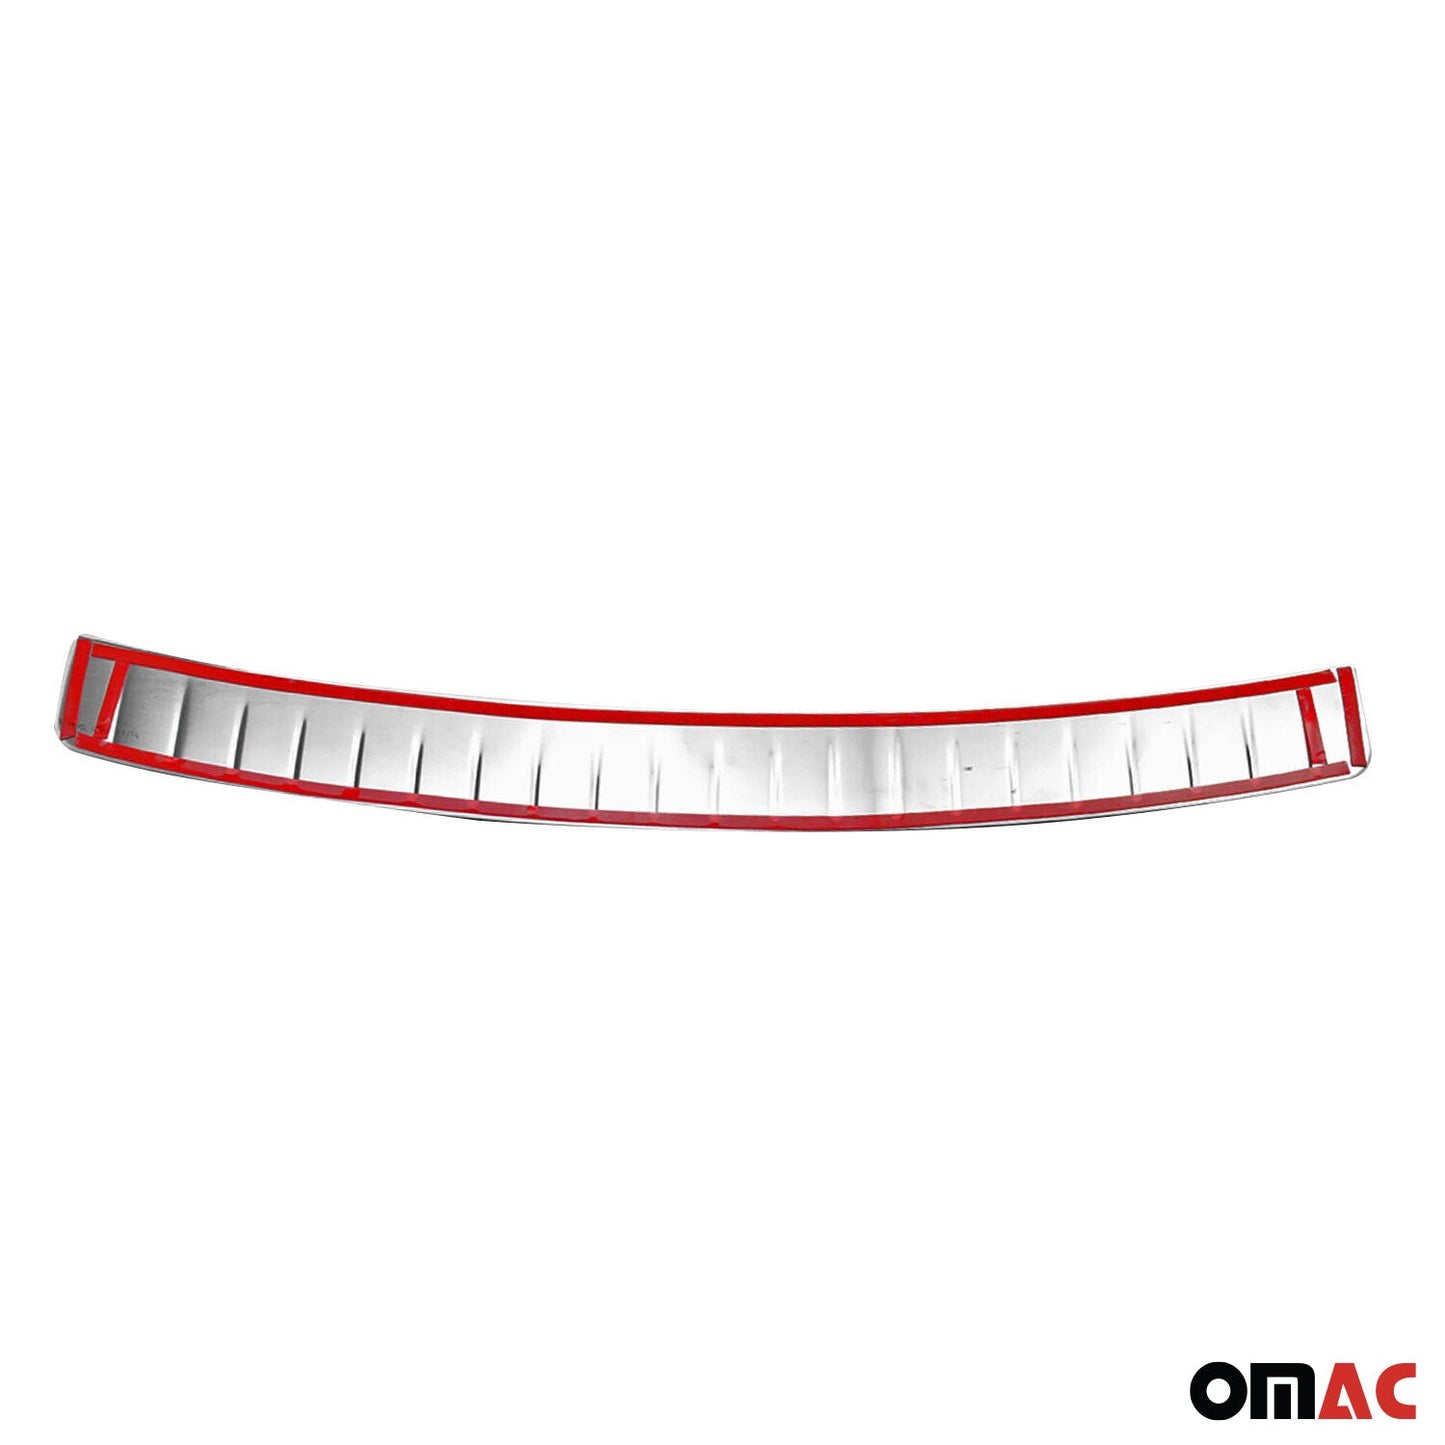 OMAC Fits BMW 3 Series E91 2005-2012 Rear Bumper Guard Trunk Sill Protector Brushed 1216095T